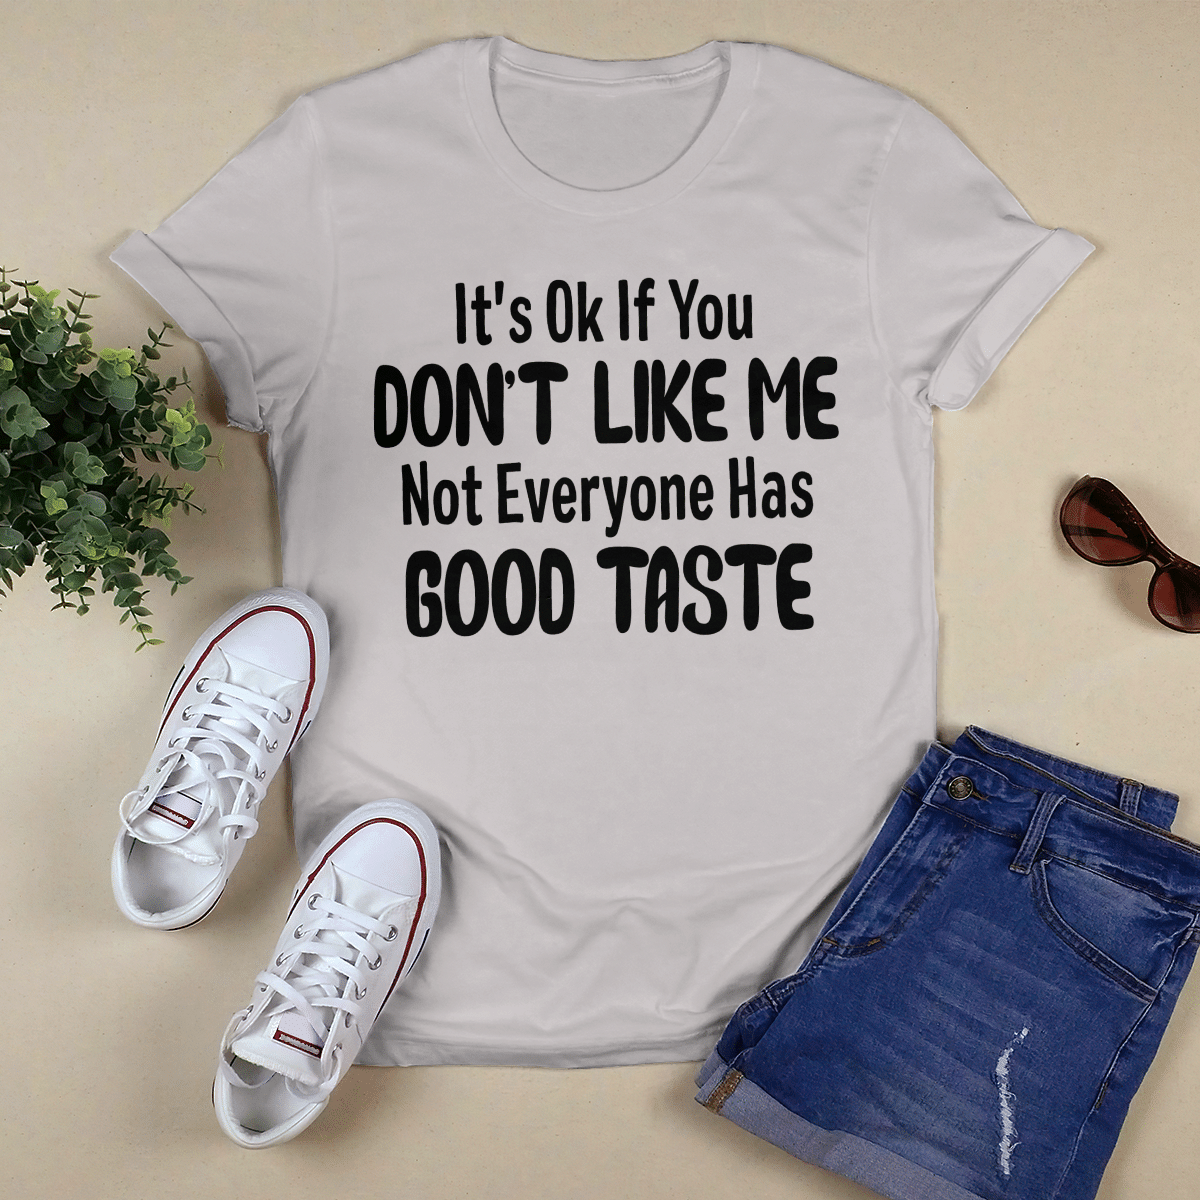 It_s Ok If You Don_t Like Me shirt